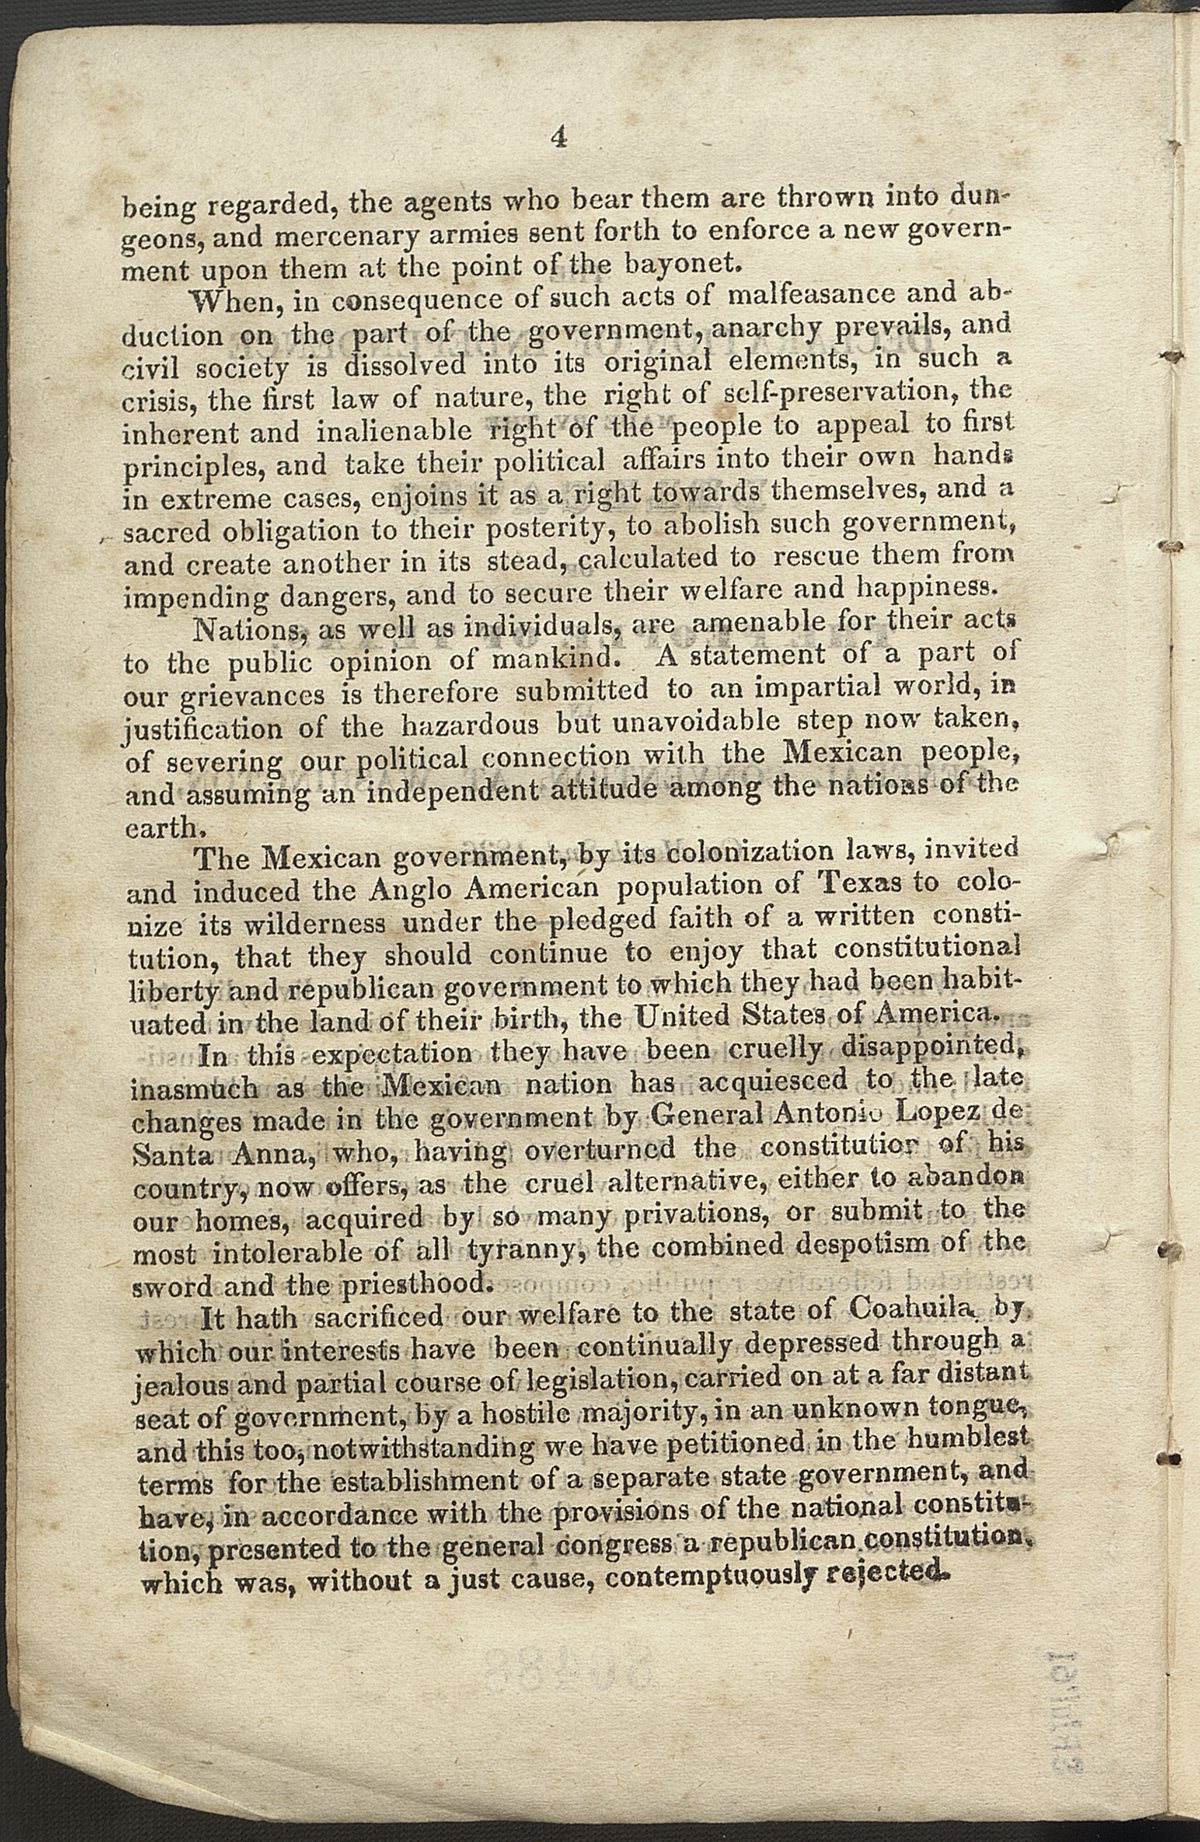 Declaration of Independence, page 4